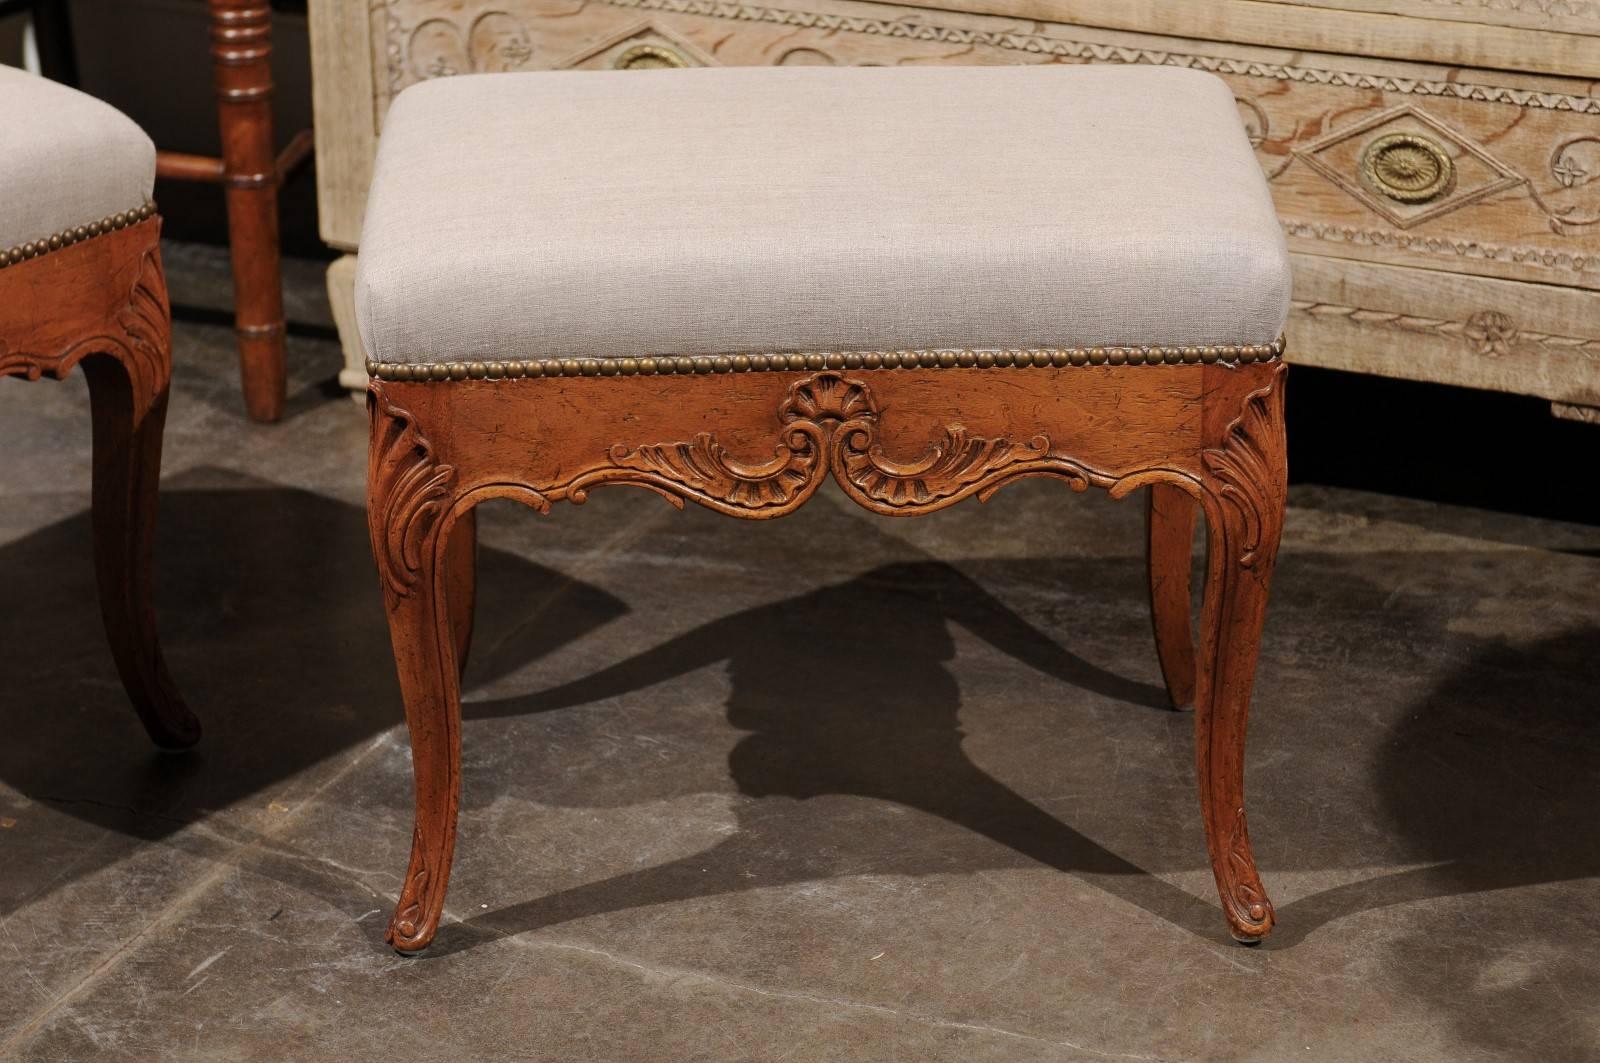 20th Century Pair of Rococo Style Italian Carved Walnut Stools with Linen Upholstered Seats